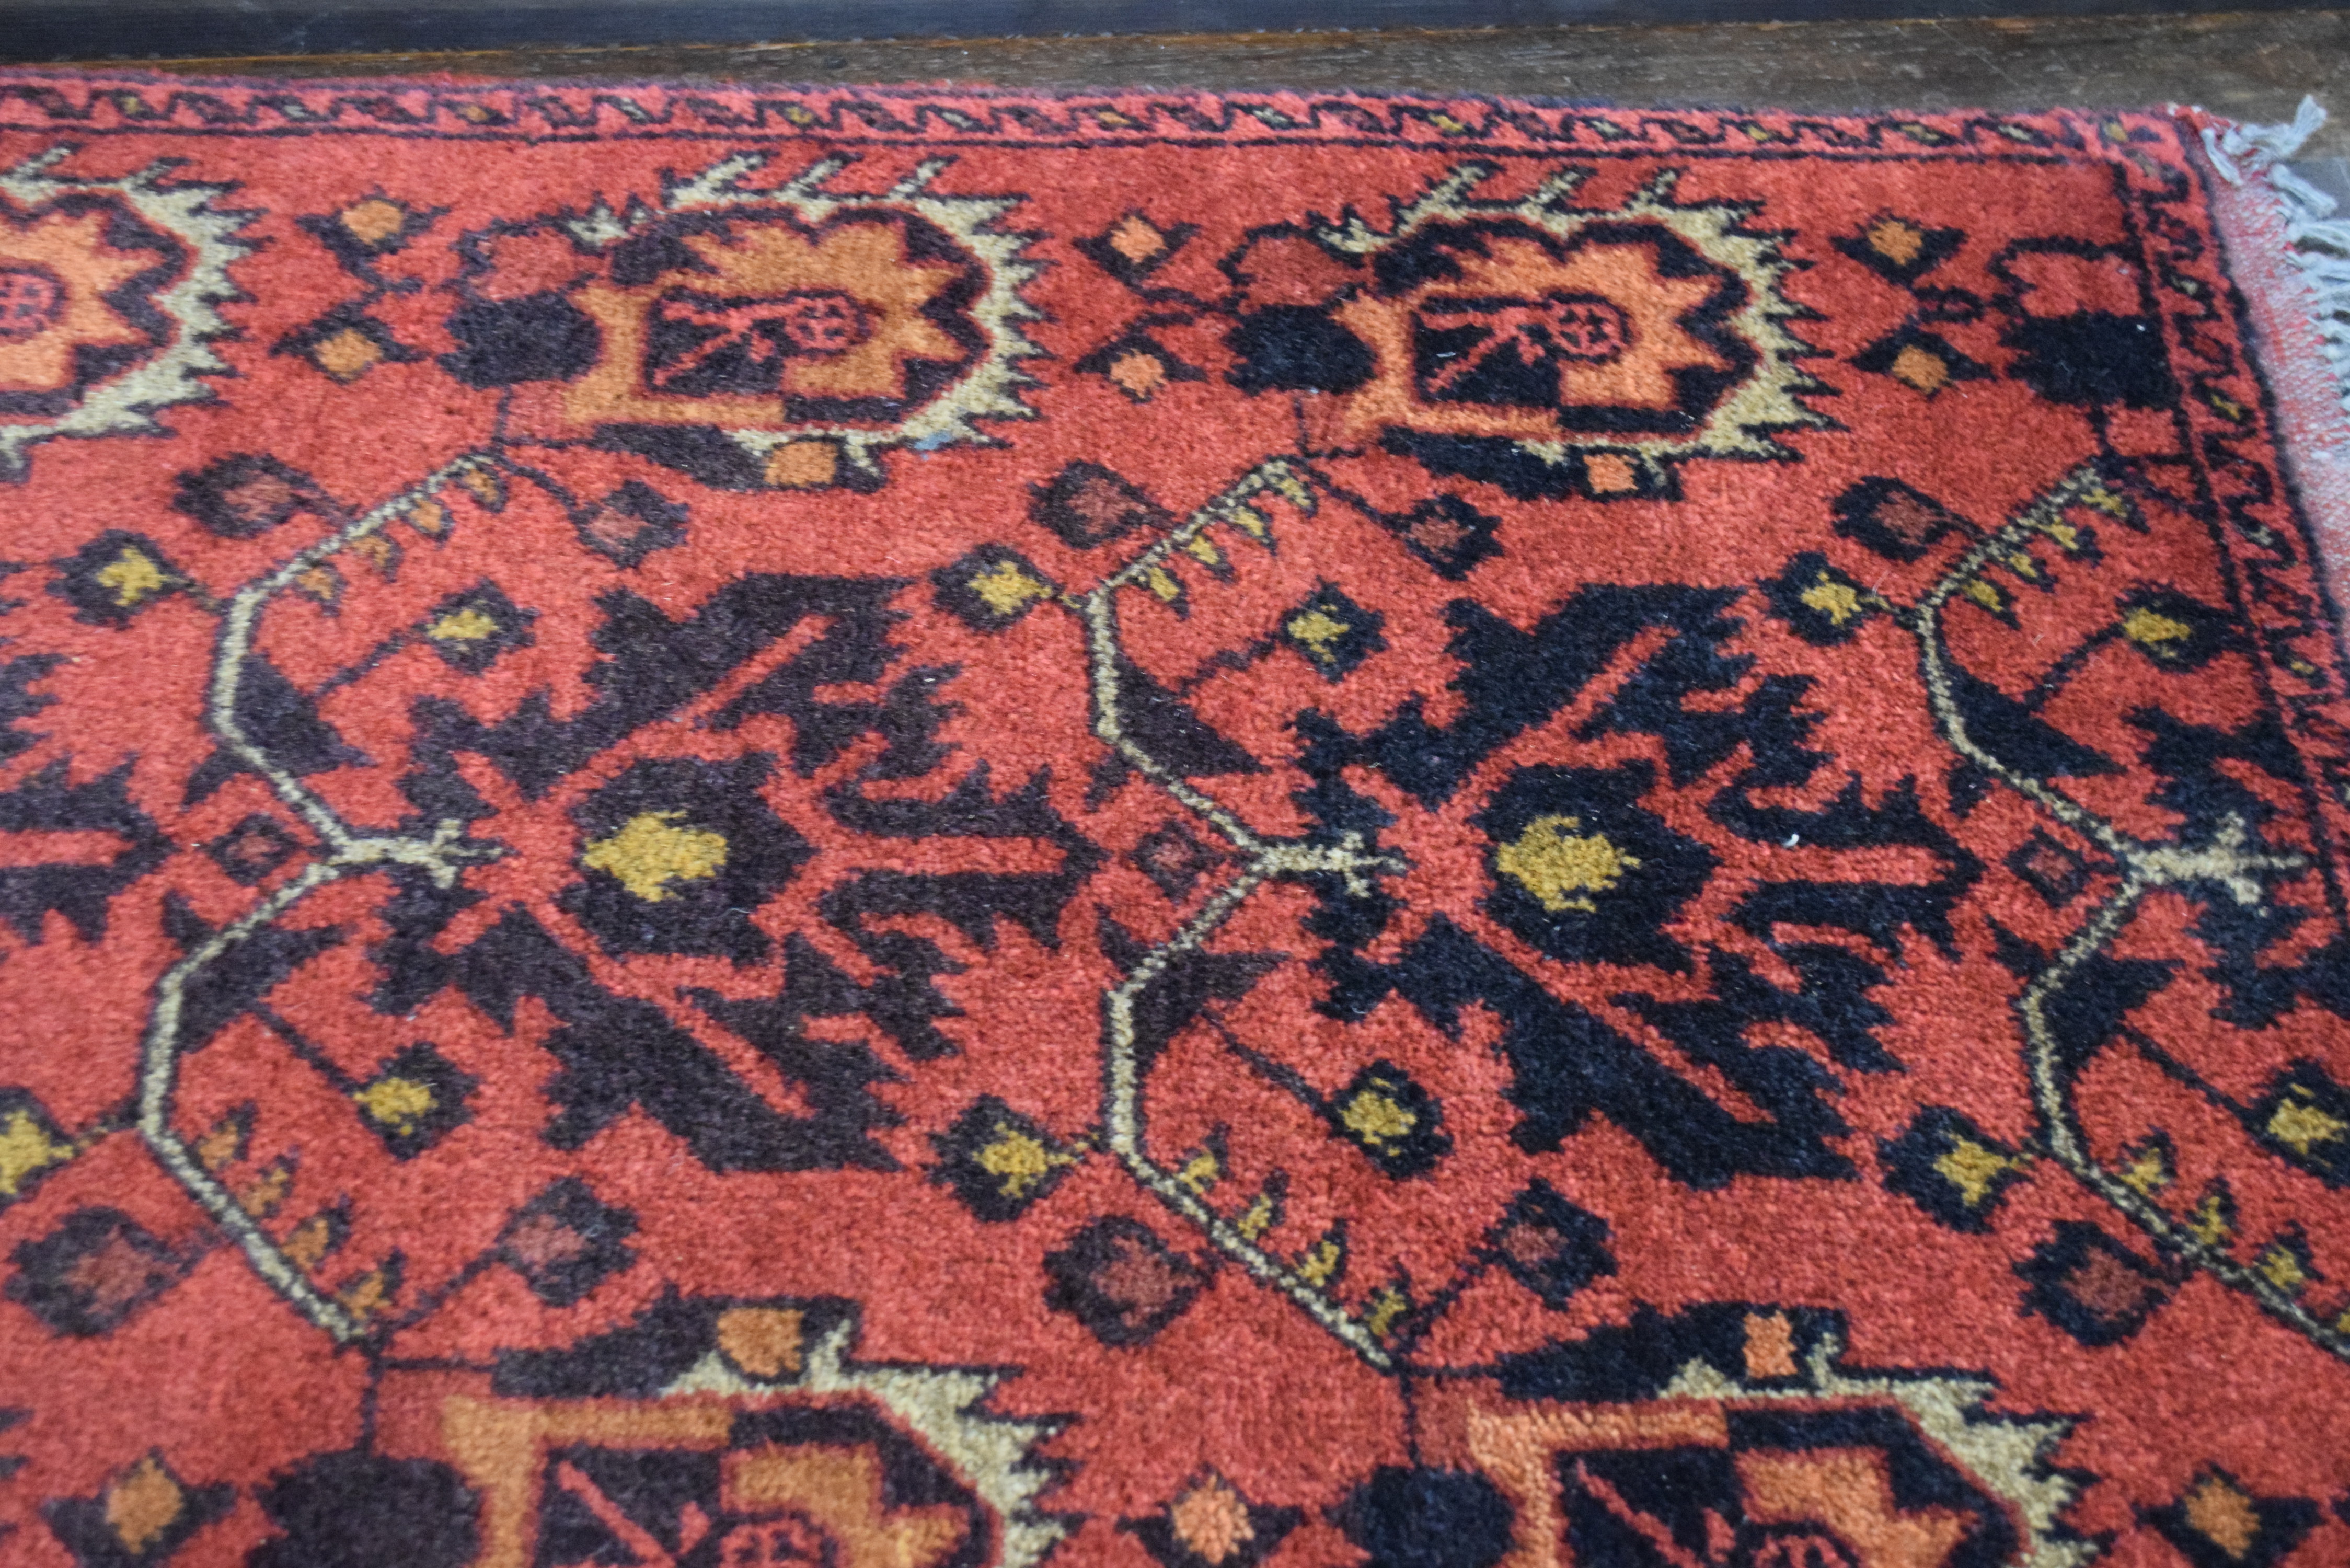 Small Middle Eastern wool rug or prayer mat decorated with black and orange stylised foliage on a - Image 4 of 4